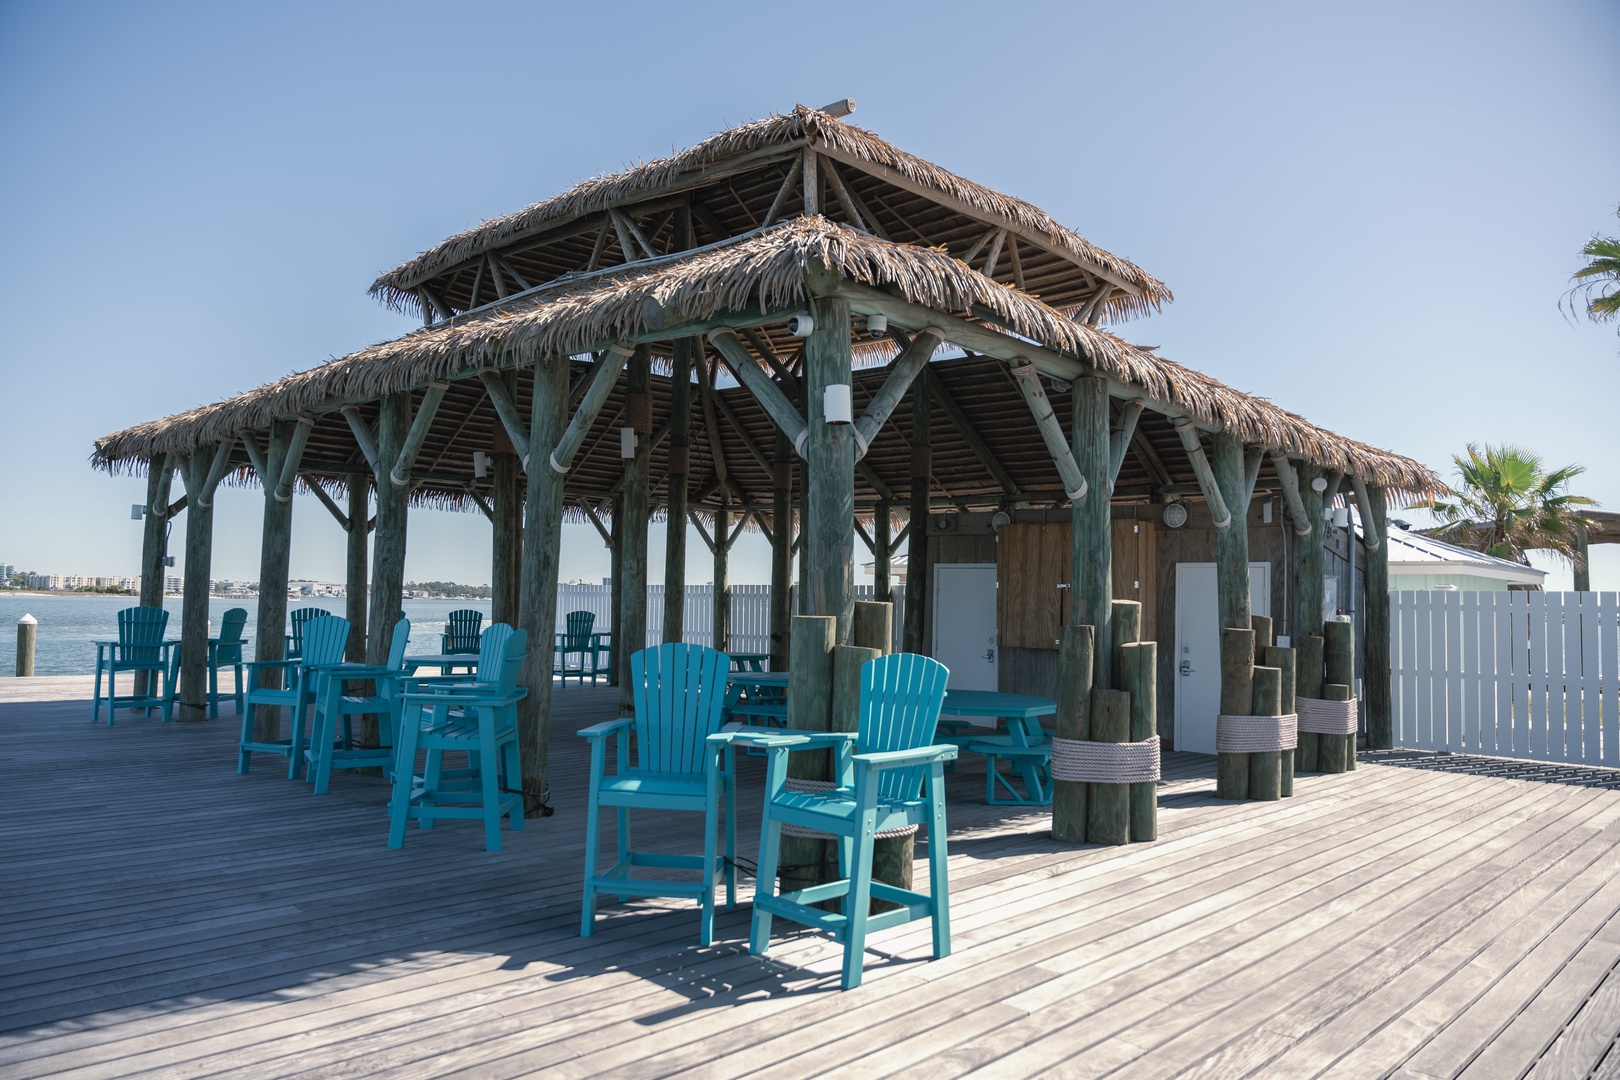 Enjoy scenic bay views while sipping on a cool drink in the tiki hut